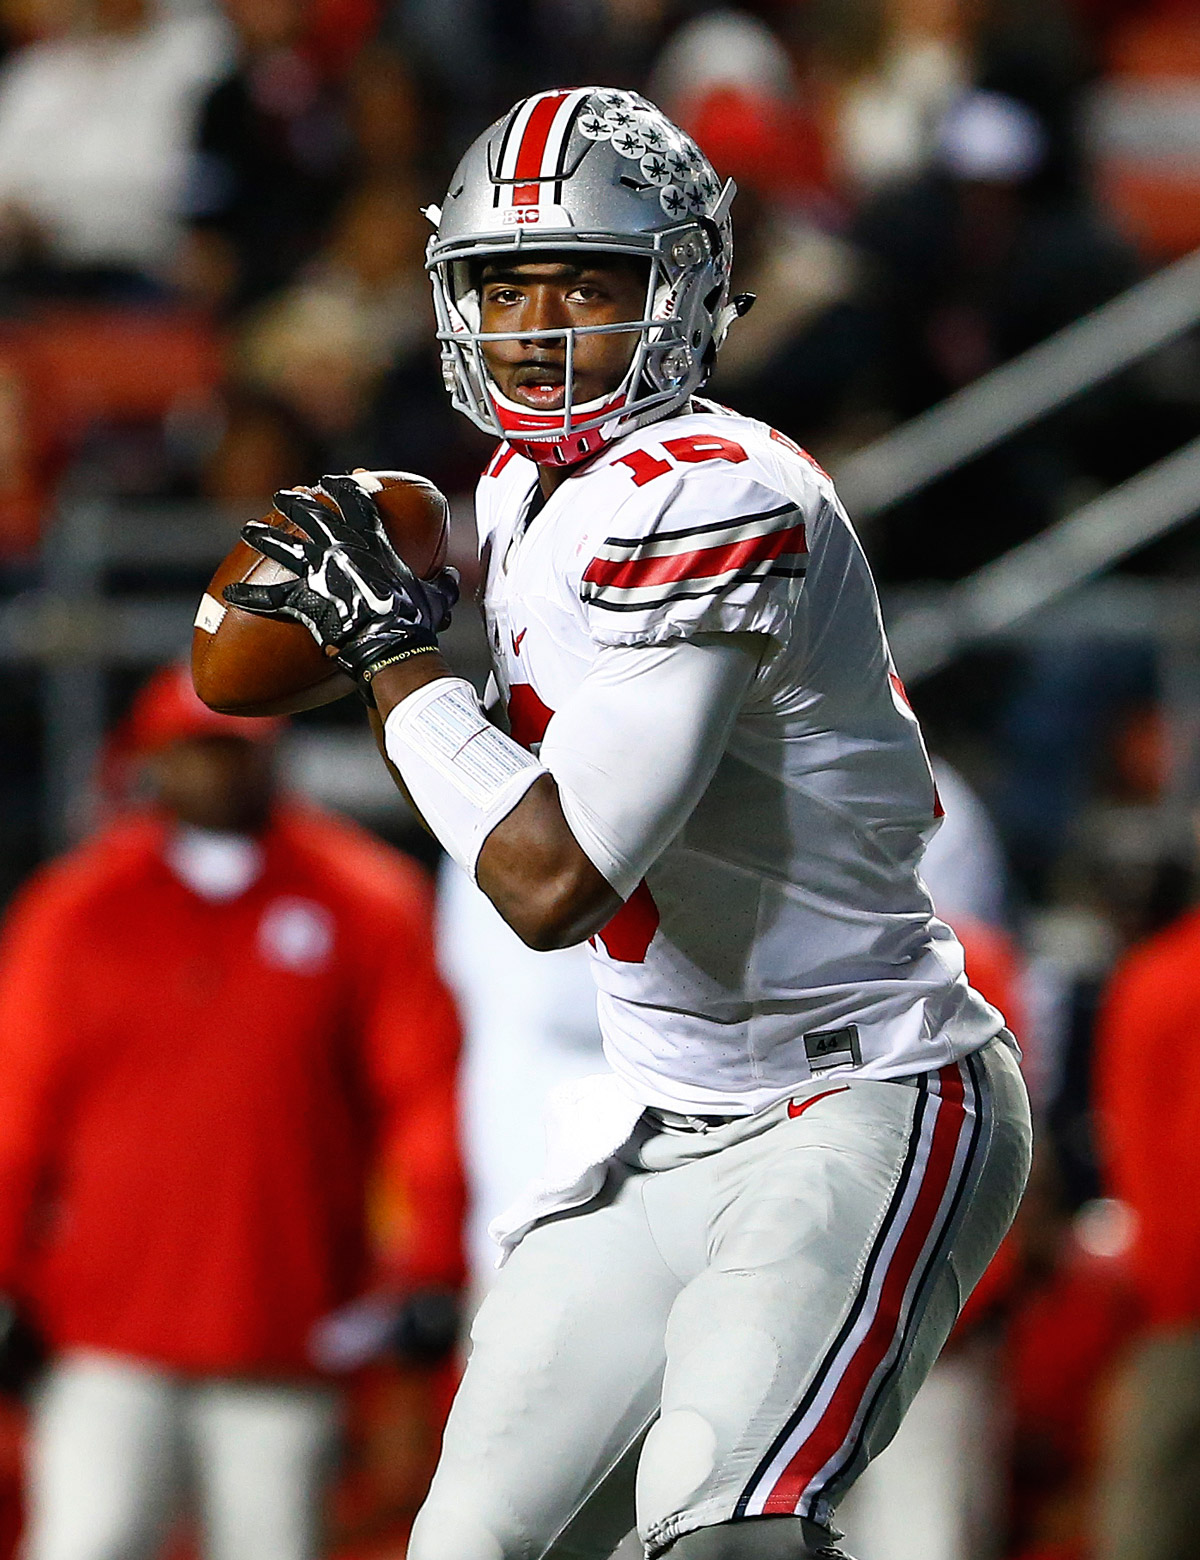 Quarterback J.T. Barrett of the Ohio State Buckeyes in action against the Rutgers Scarlet Knights during a game at High Point Solutions Stadium in Piscataway, N.J., on Oct, 24, 2015. (Rich Schultz—Getty Images)